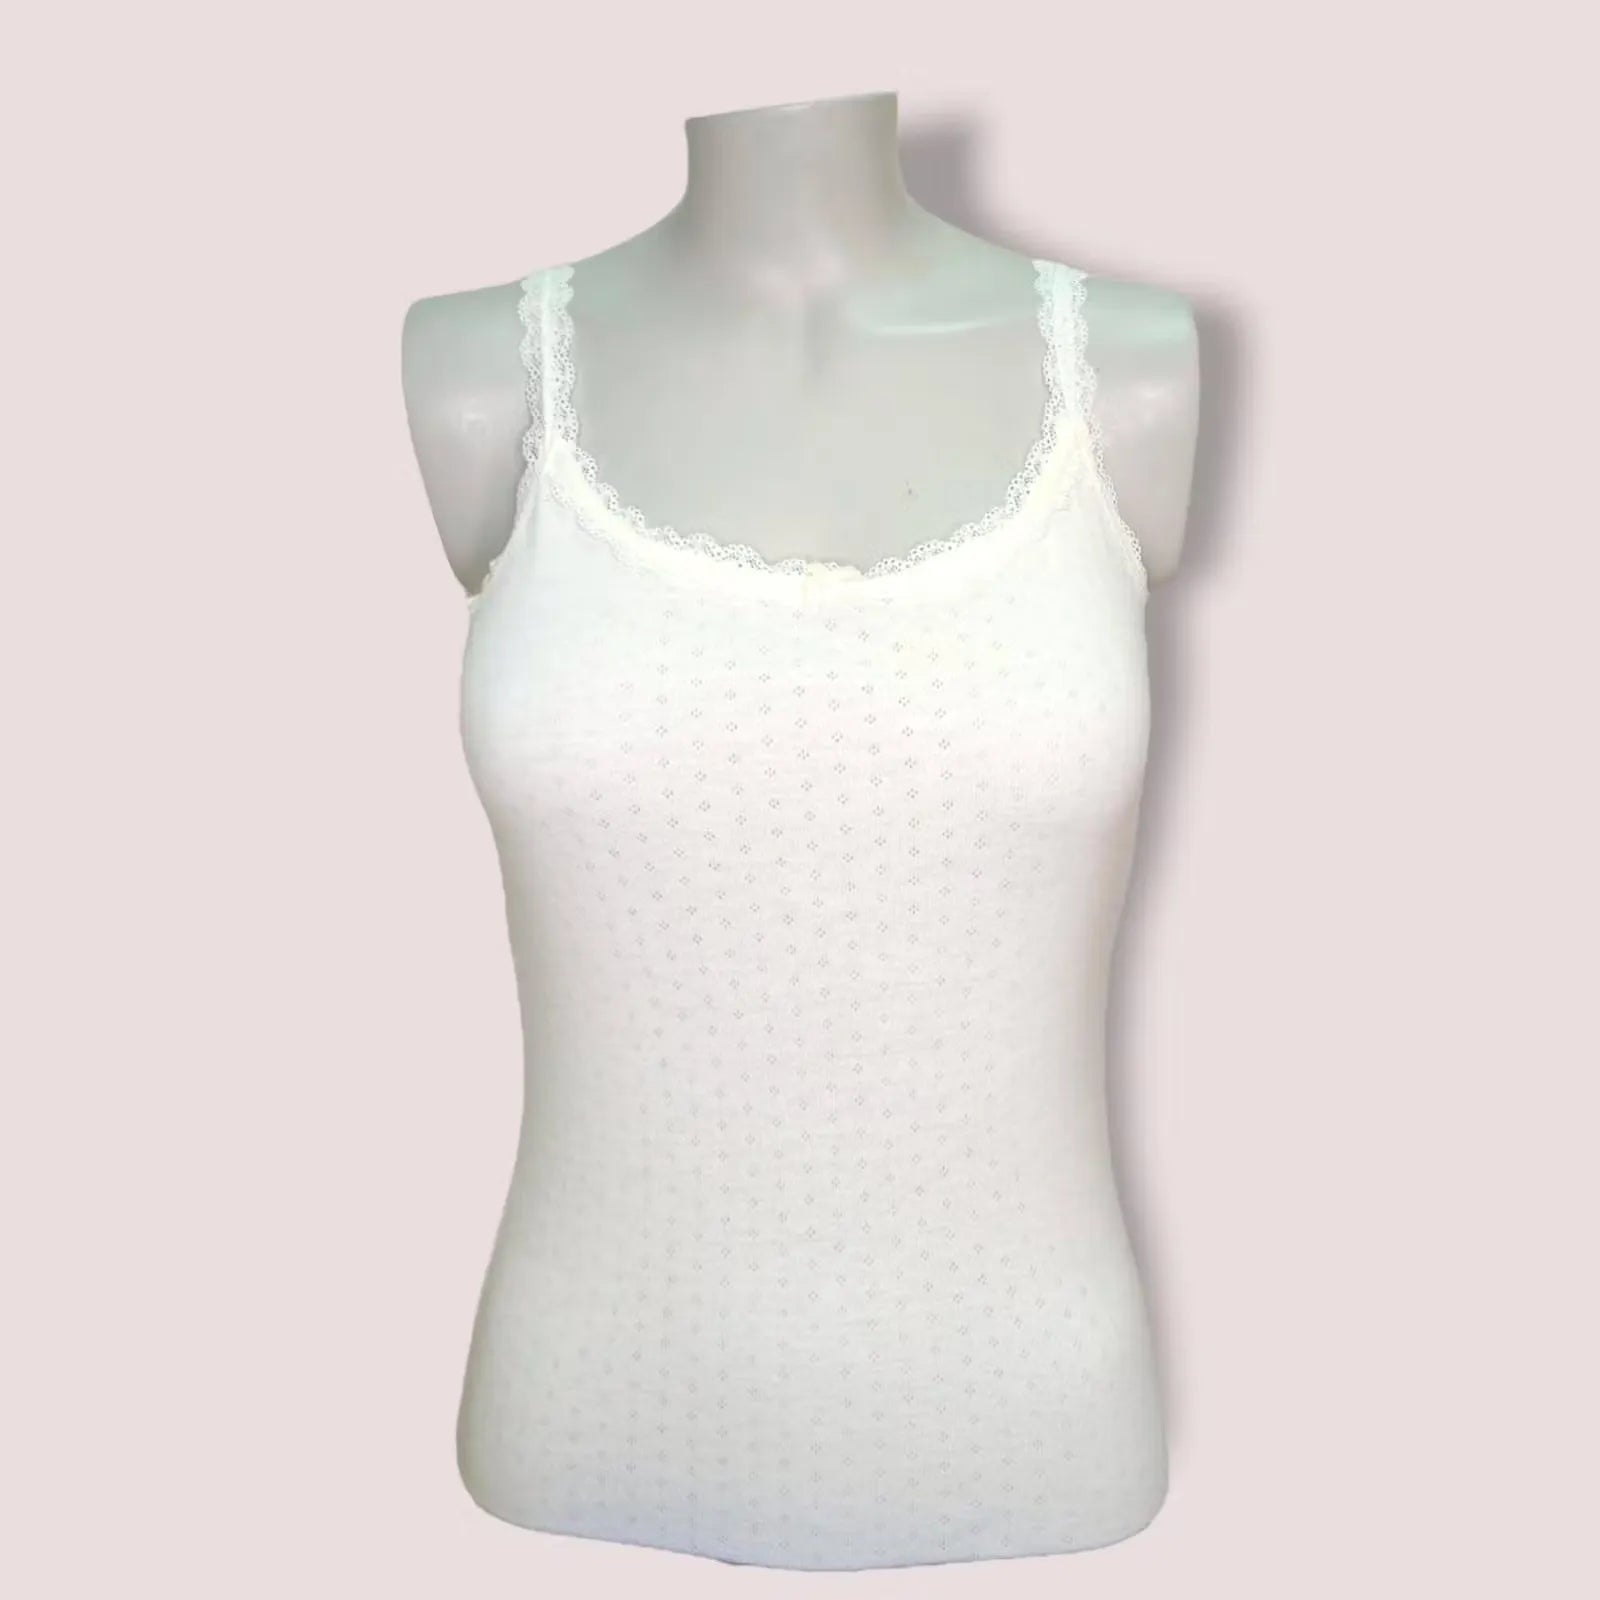 A sleeveless thermal cami in a light cream color, perfect for layering or wearing alone. Made with soft and cozy fabric for ultimate comfort in winter.